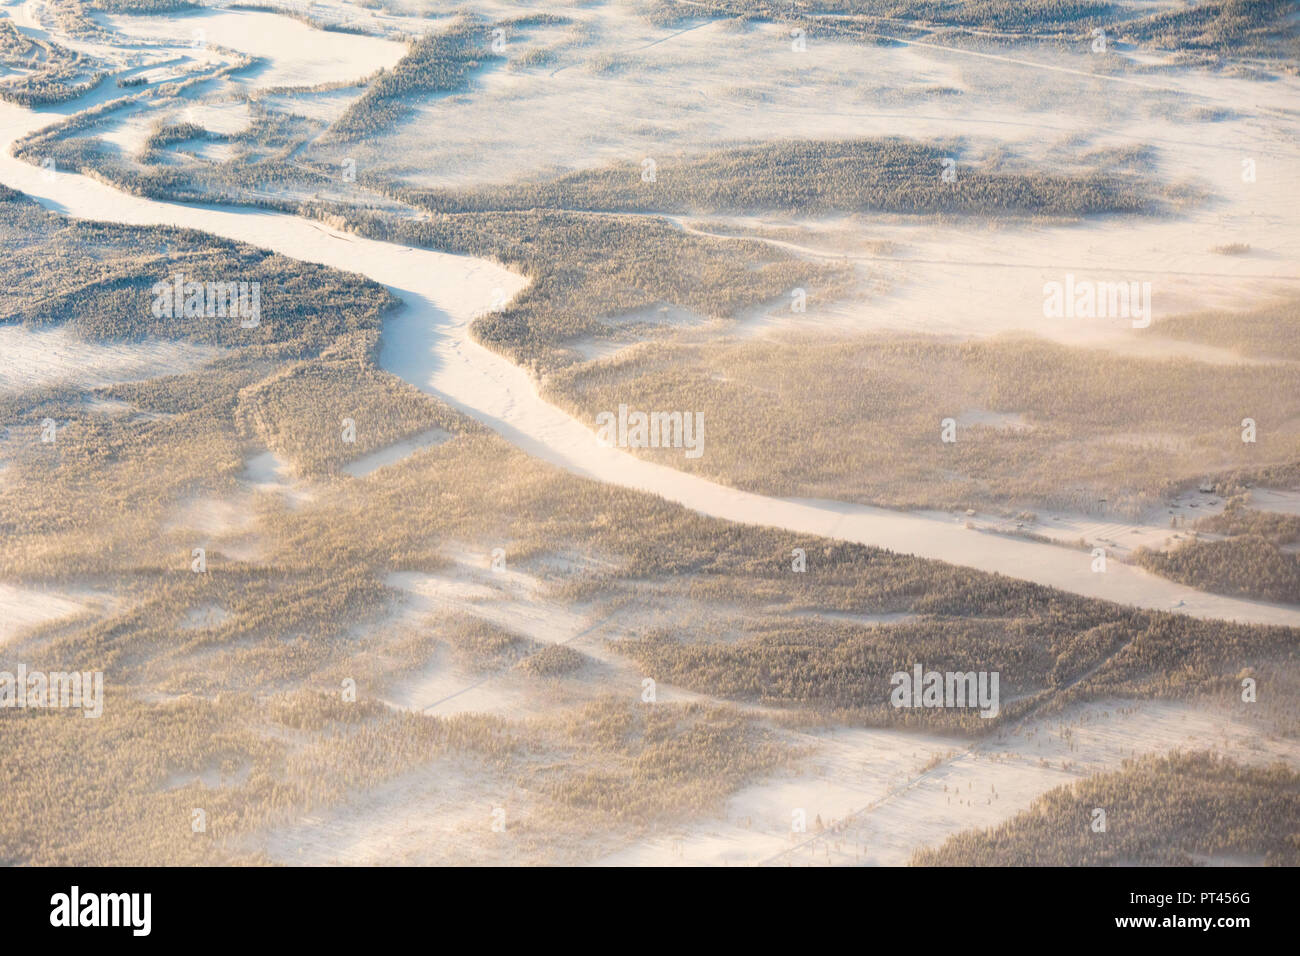 Aerial view of forest in the frozen landscape, Levi, Kittila, Lapland, Finland Stock Photo